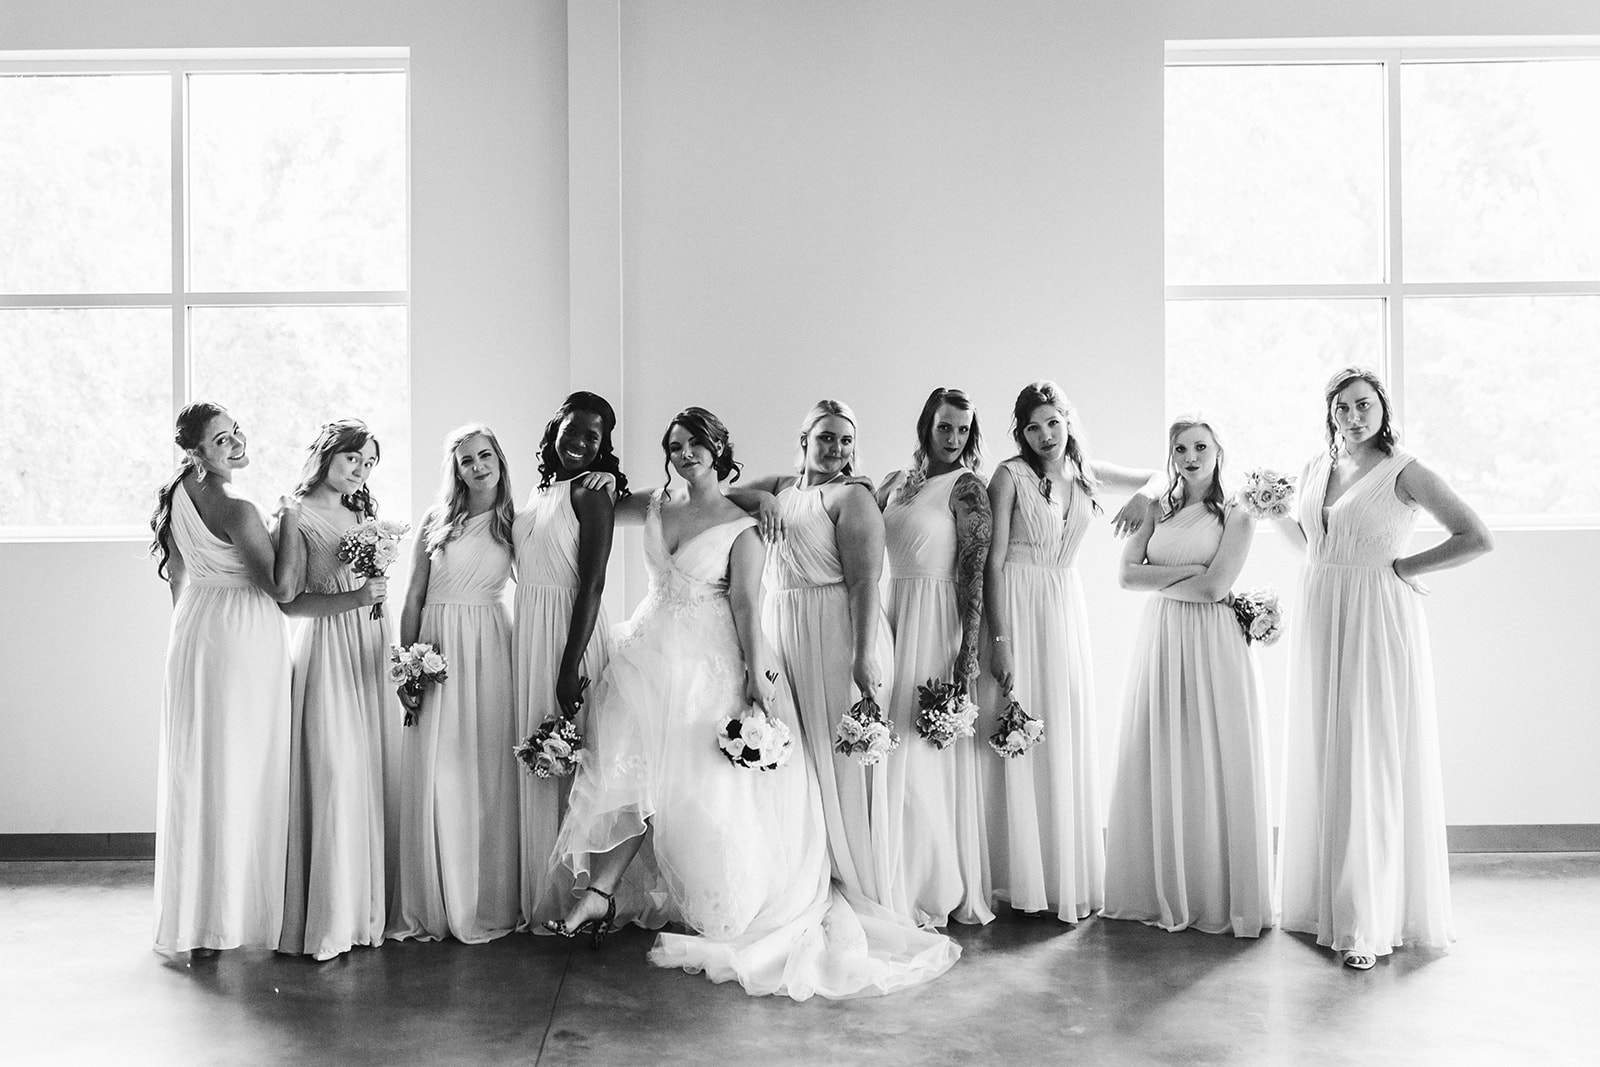 A black and white image of a bride posing with her bridesmaids.